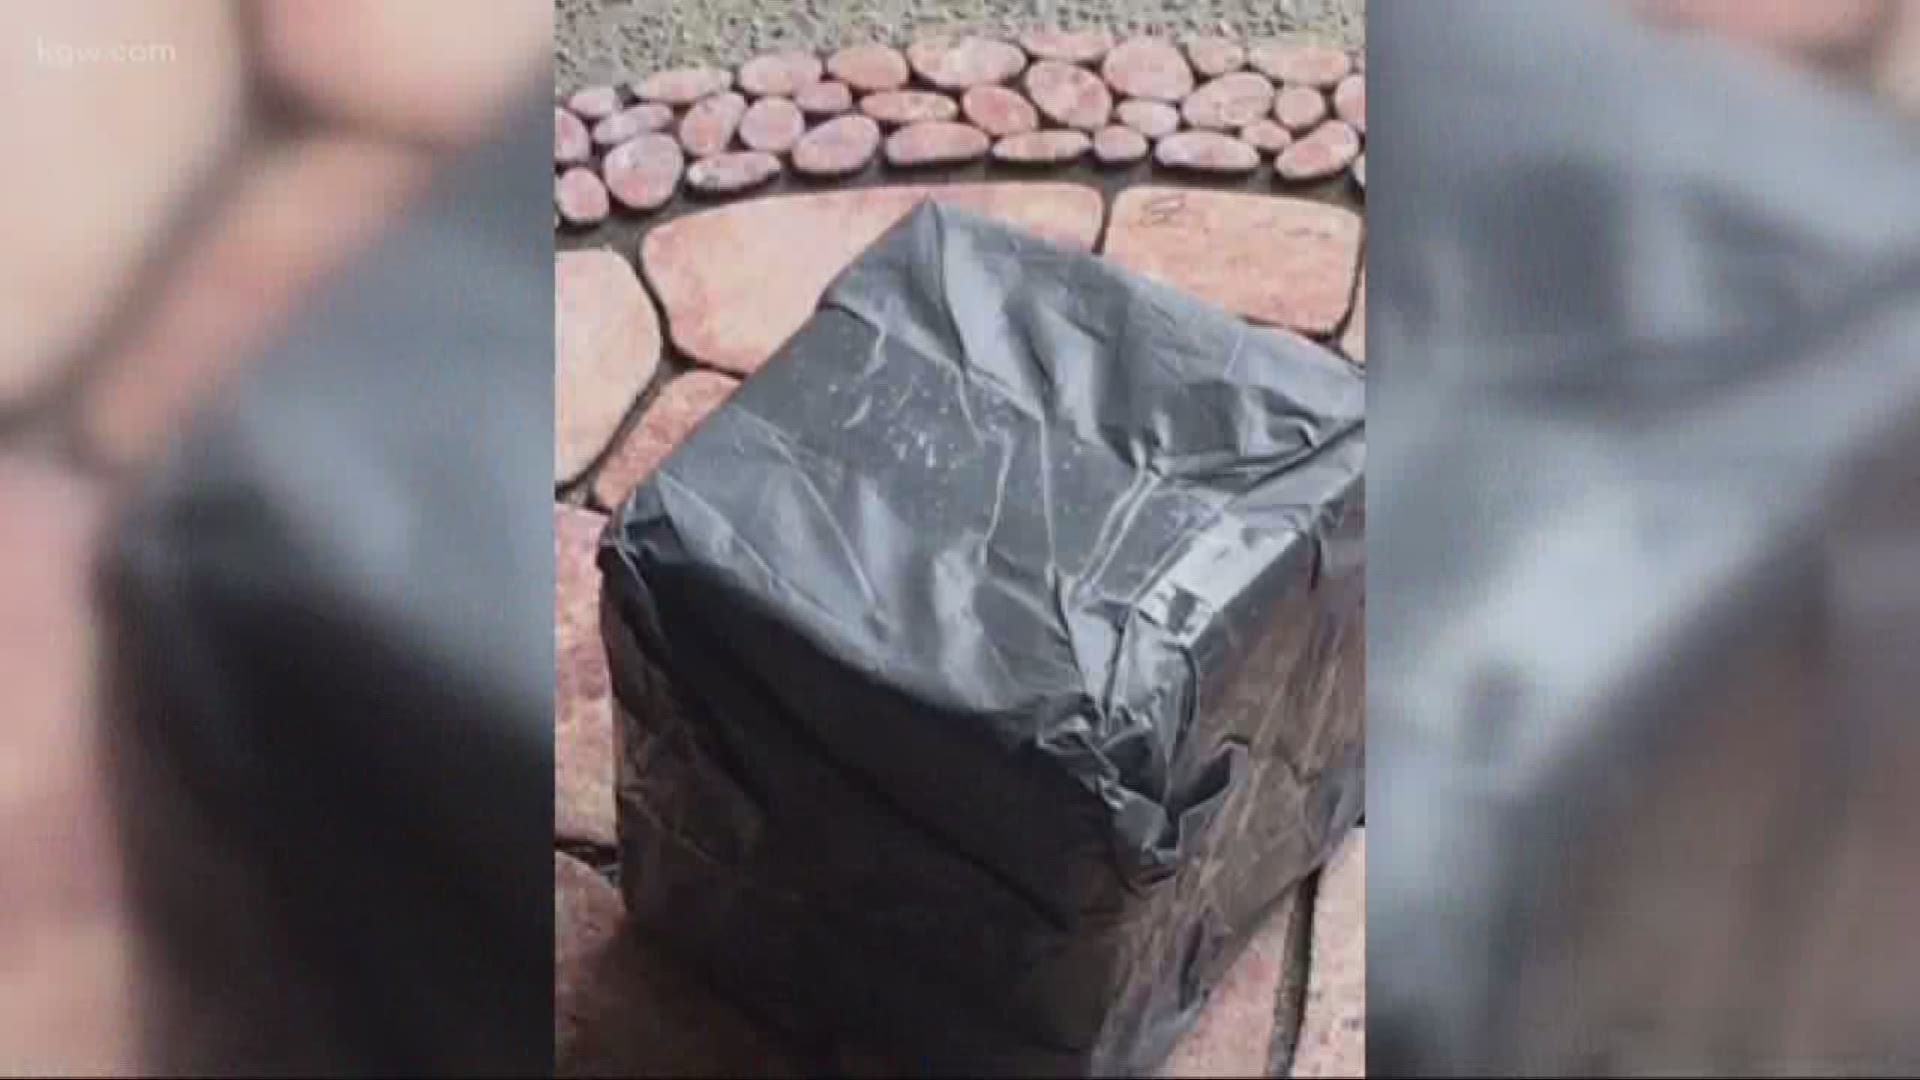 The rash of package bombs in Austin, Texas,  has led to reports about suspicious packages